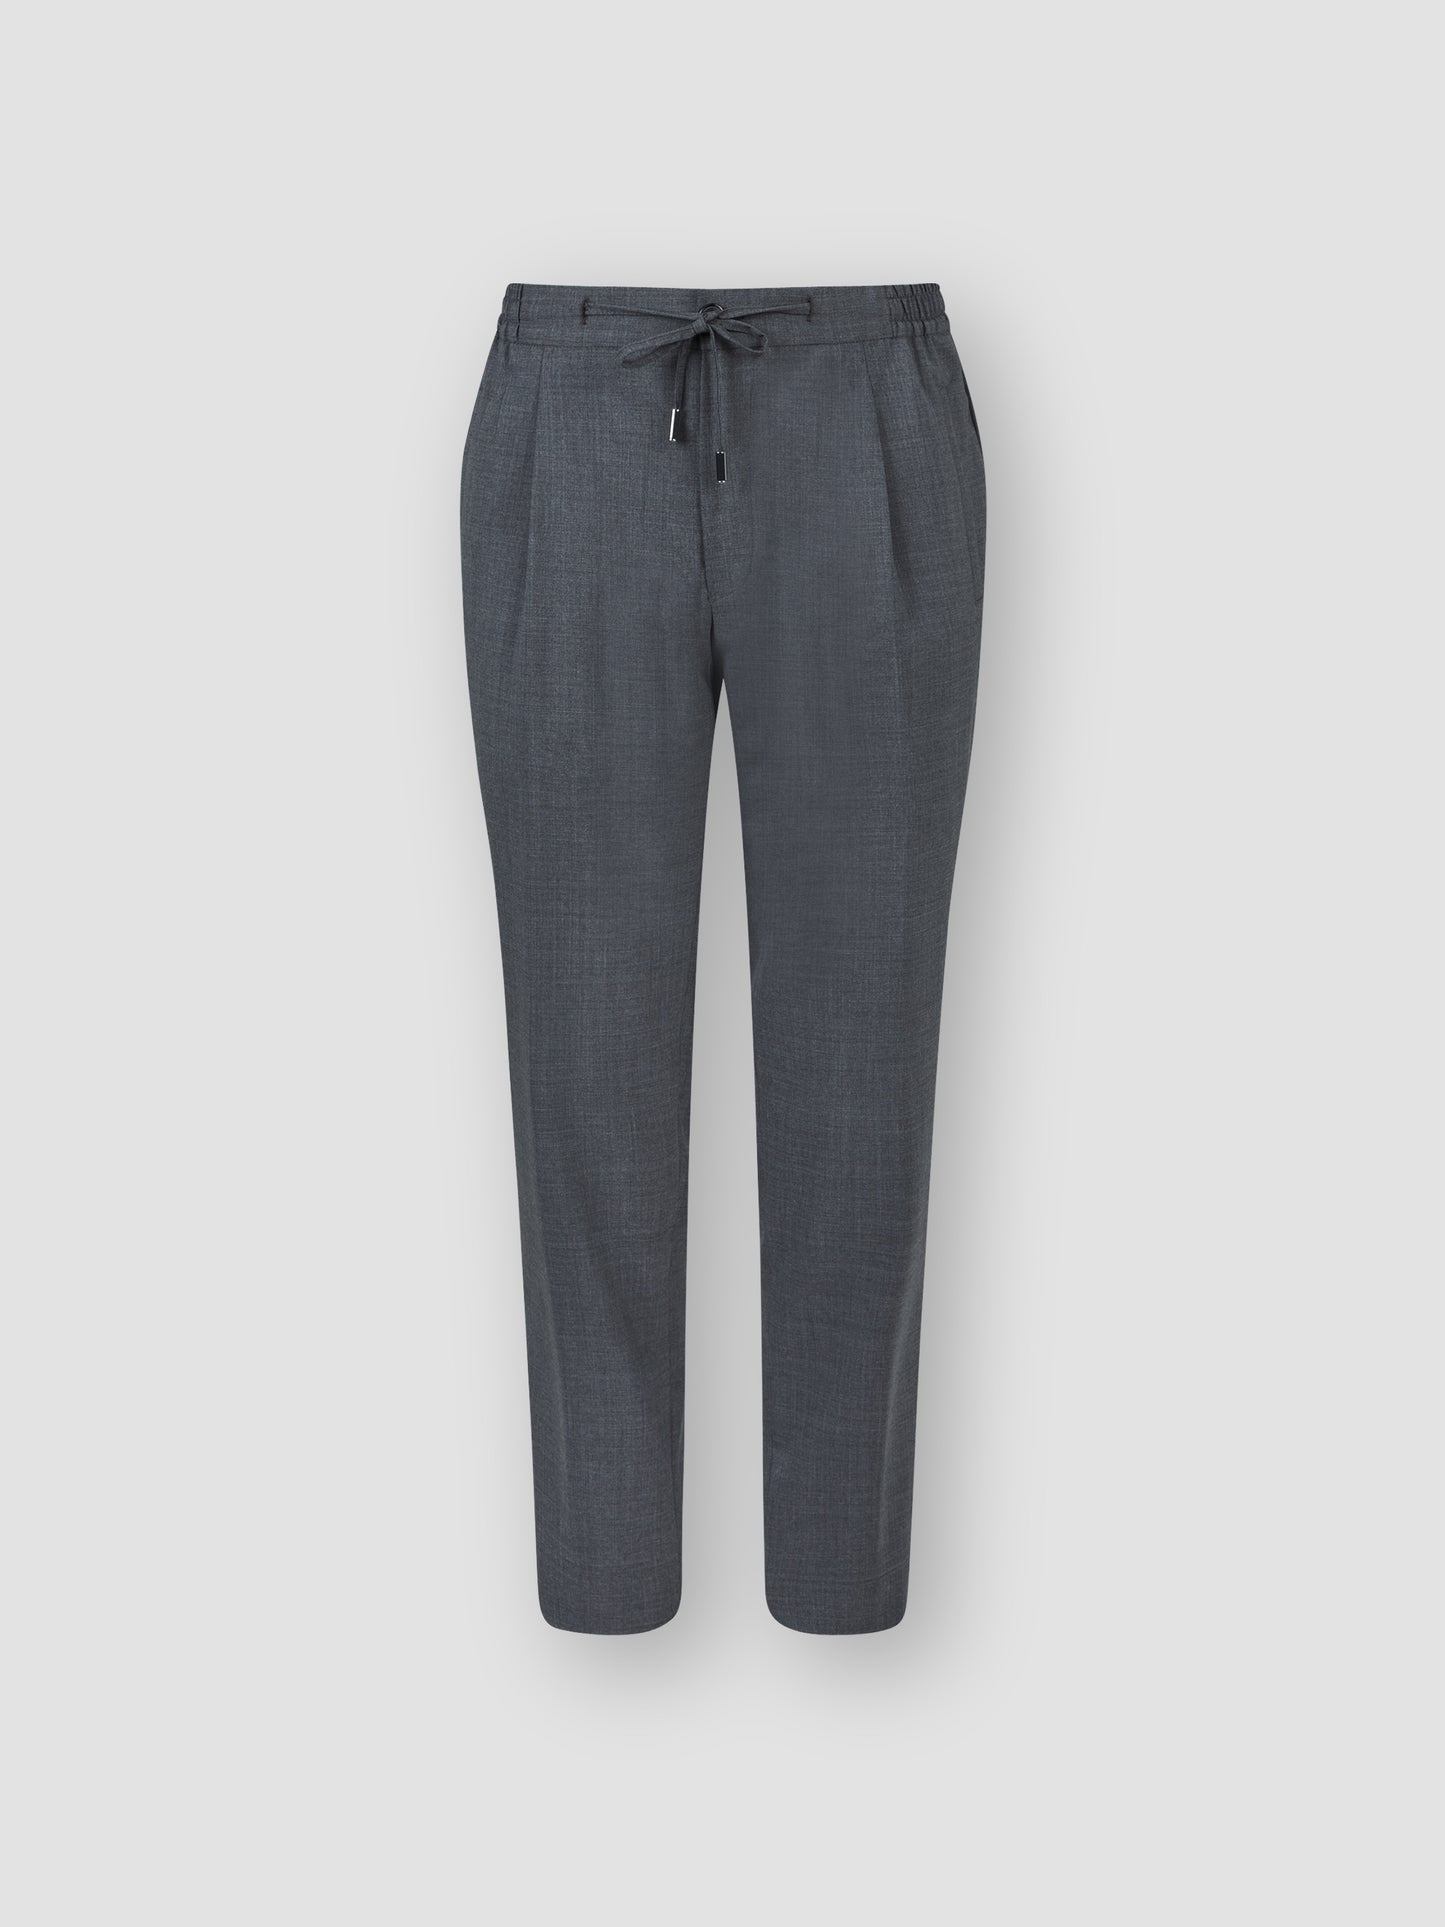 Wool Drawstring Trousers Grey Product